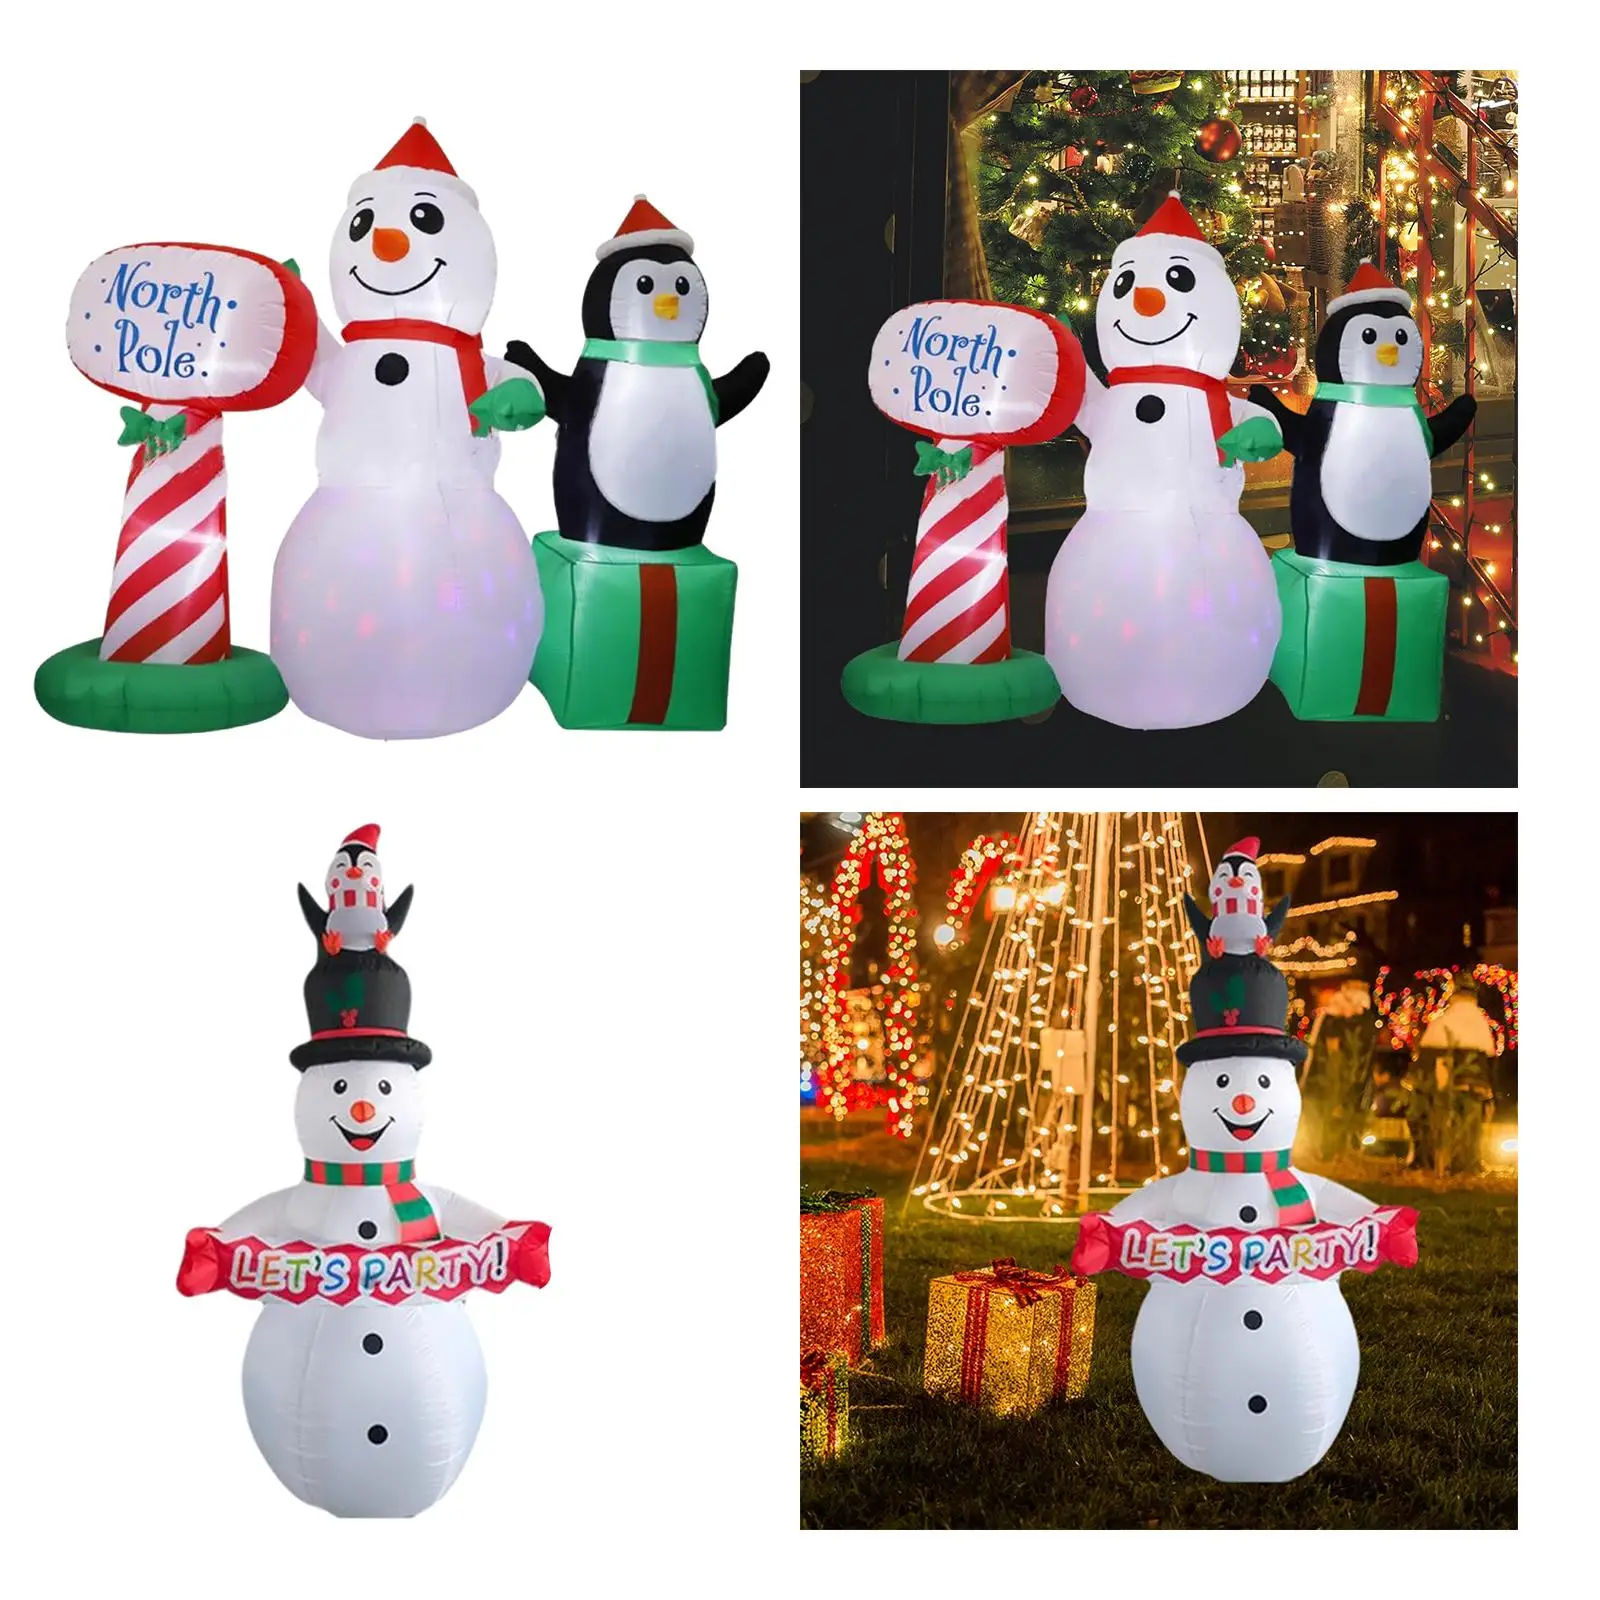 Blow up Snowman with LED Lights Funny Luminous Christmas Inflatable Snowman Christmas Decor for Yard Outside Indoor Garden Patio